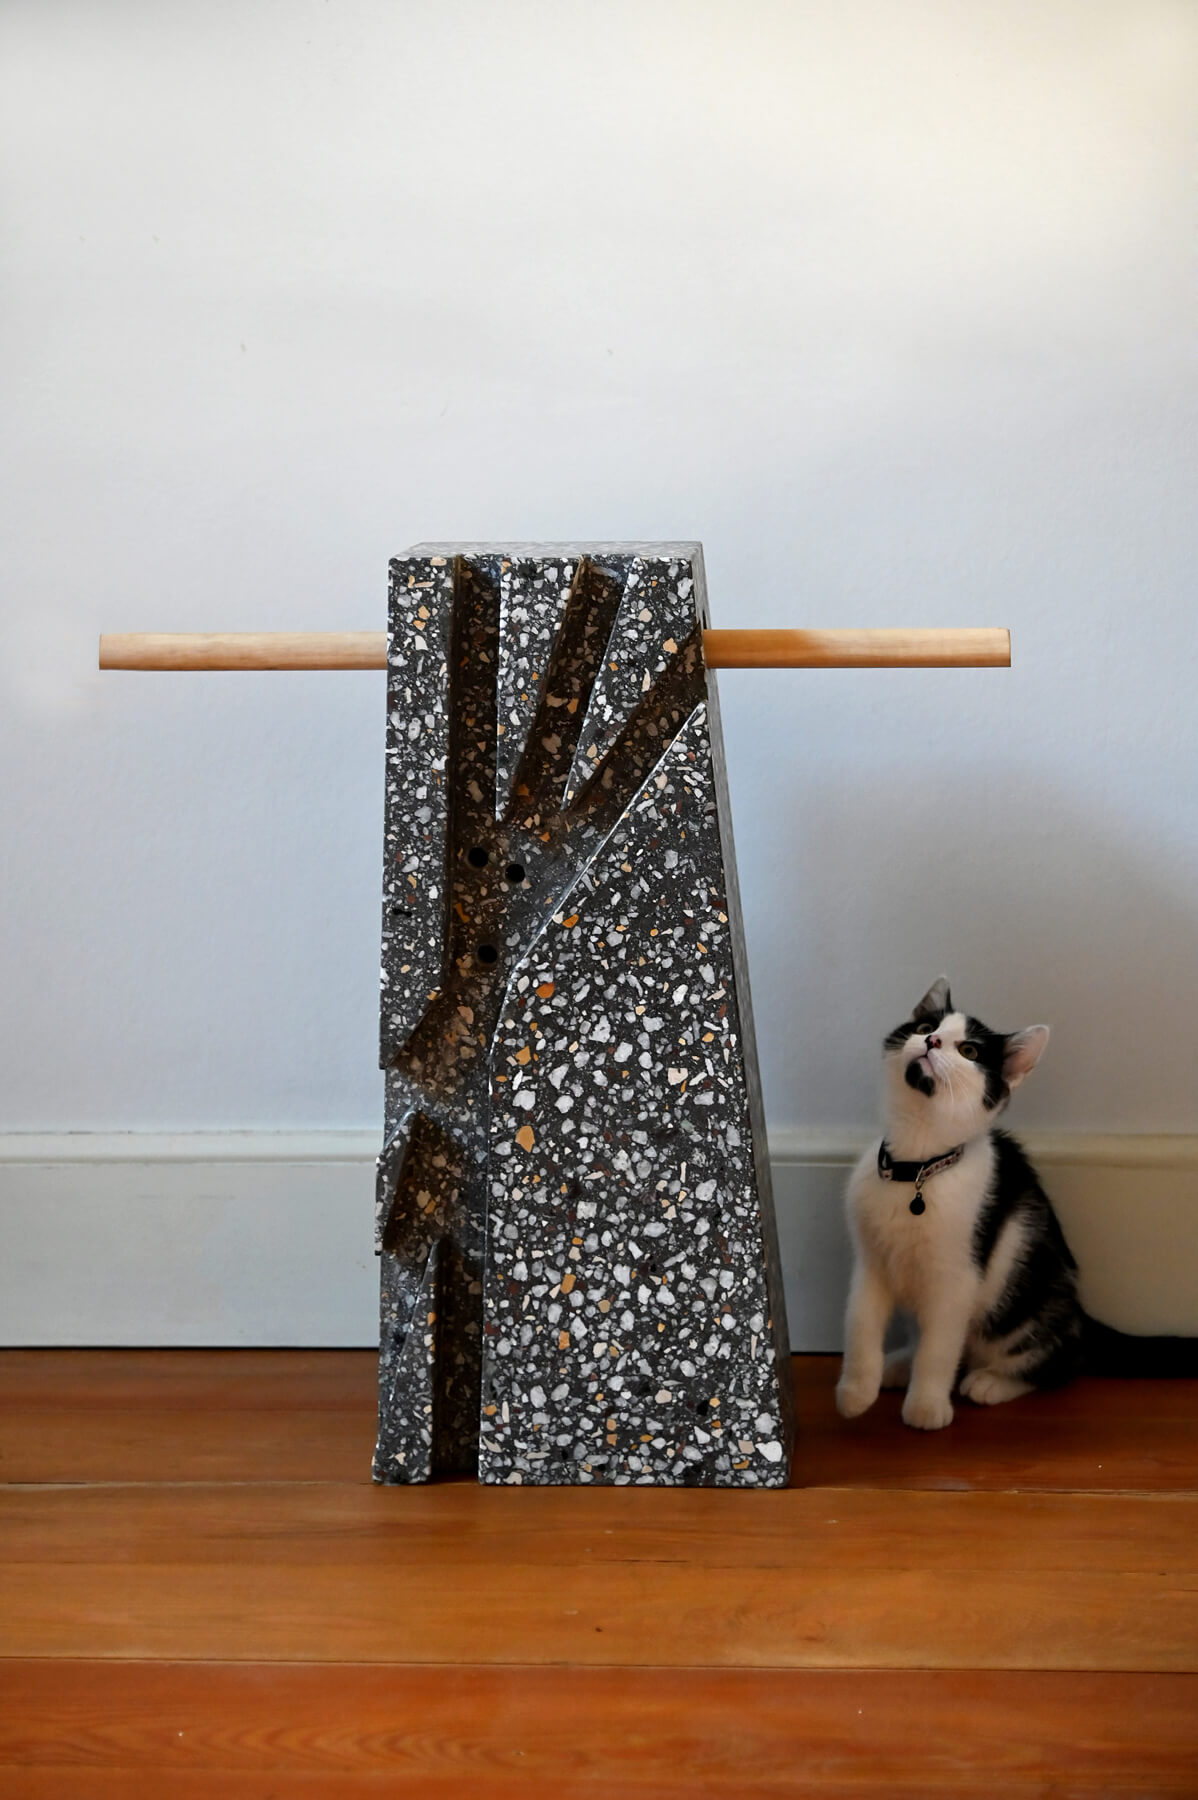 Line Balance floor lamp - size with a kitten